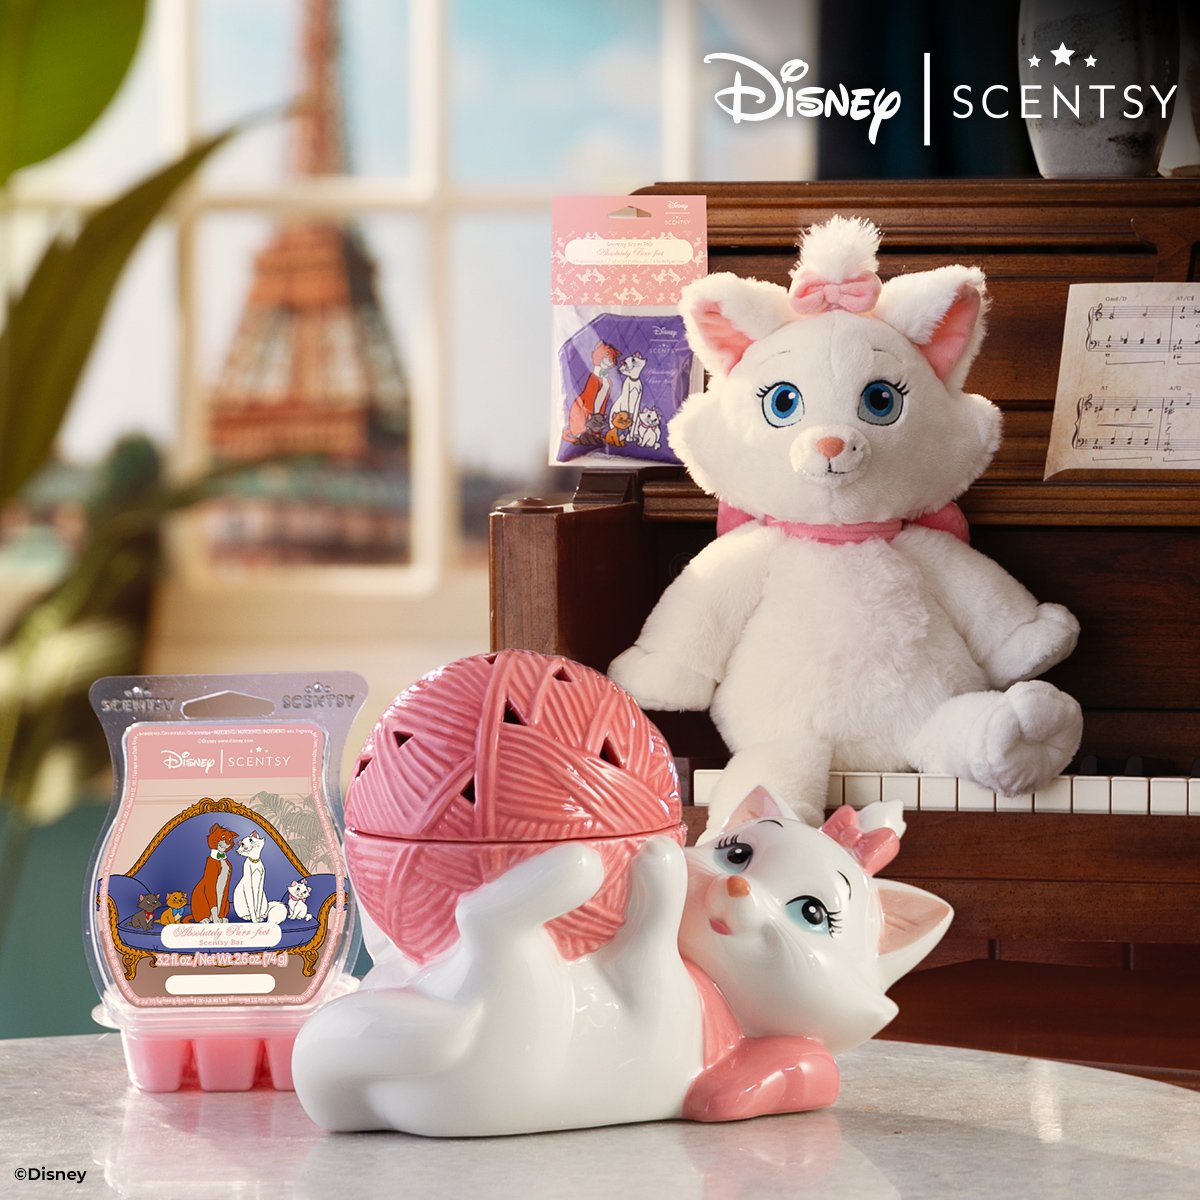 Disney The Aristocats Scentsy Collection